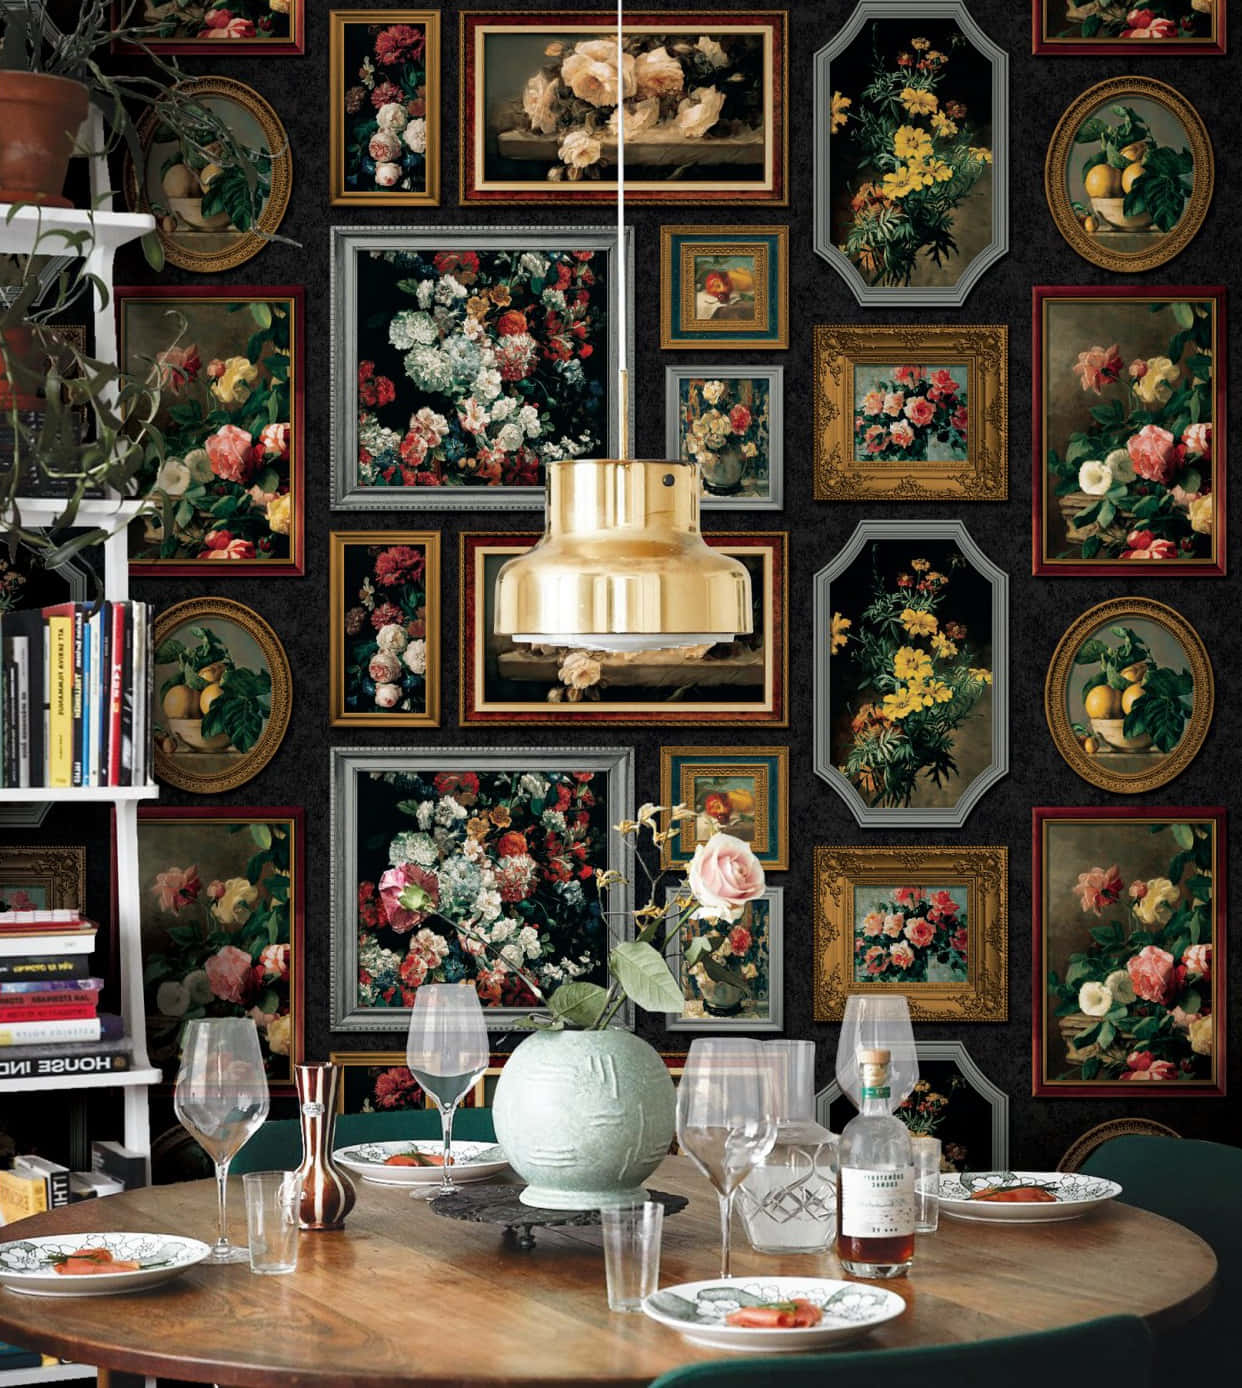 Conventional Dining Room With Artistic Frame Wallpaper